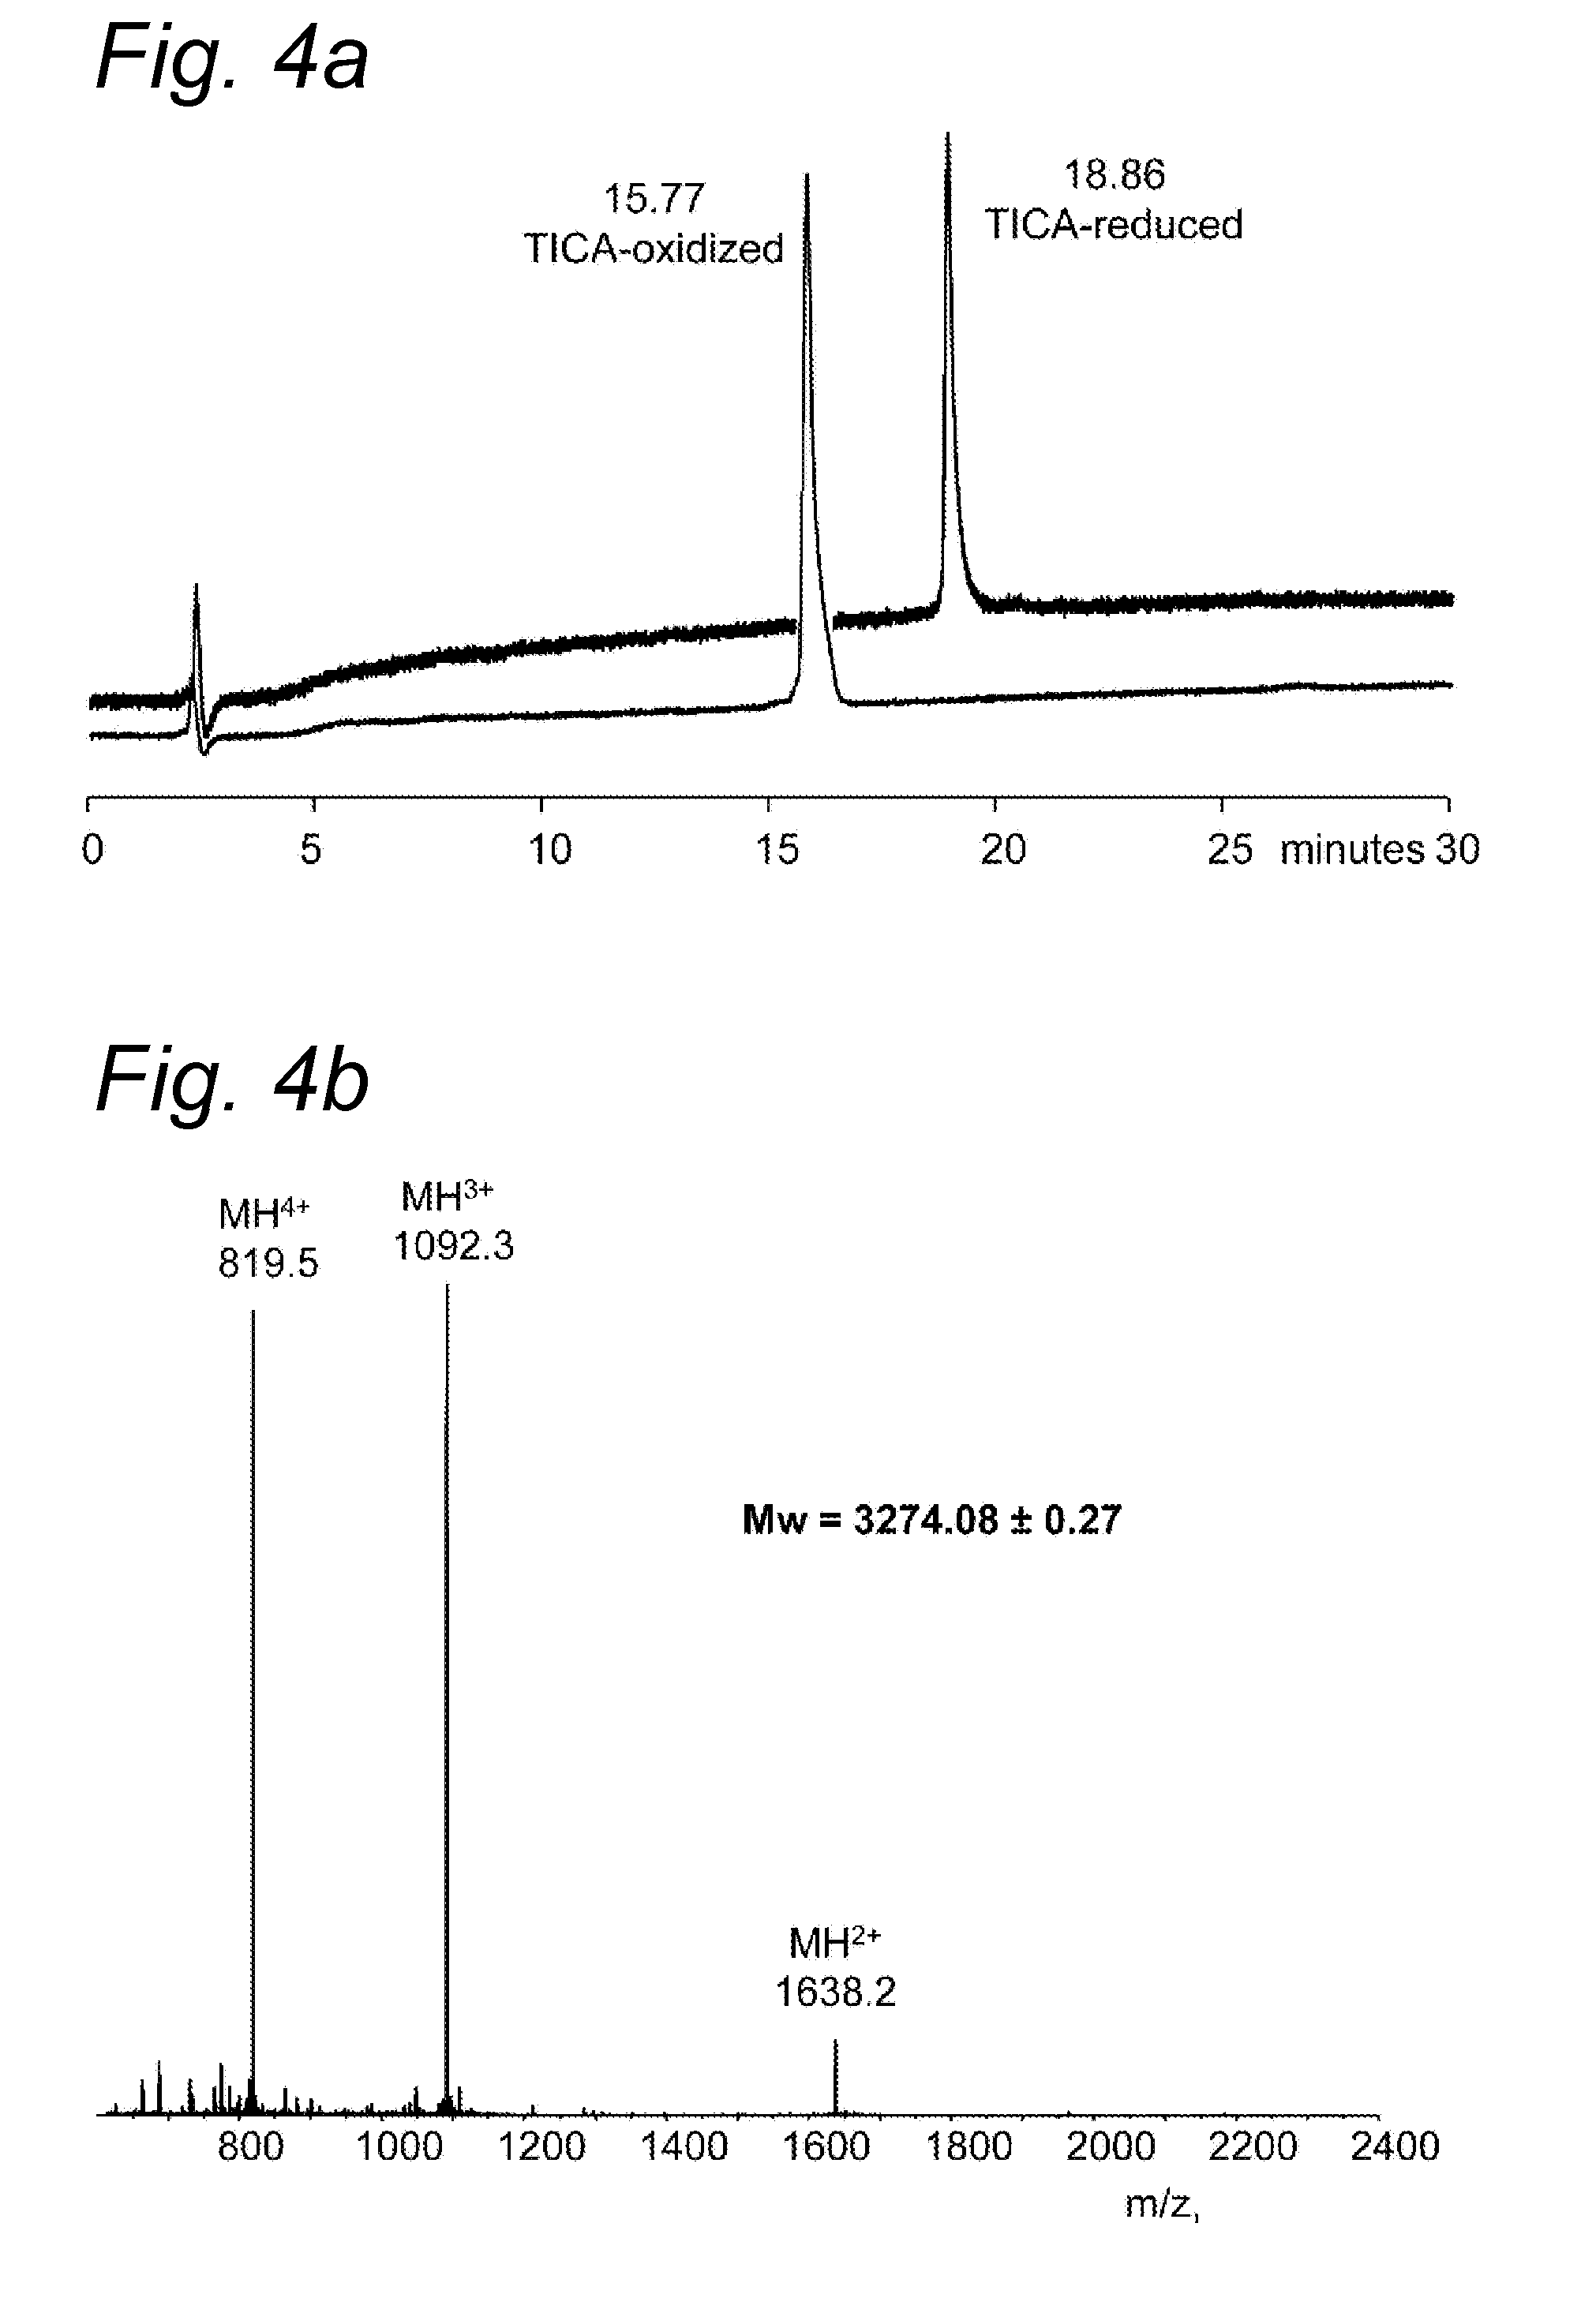 Thermostable Inhibitors of Activation of the Blood Clotting System Through Contact with Foreign Surfaces